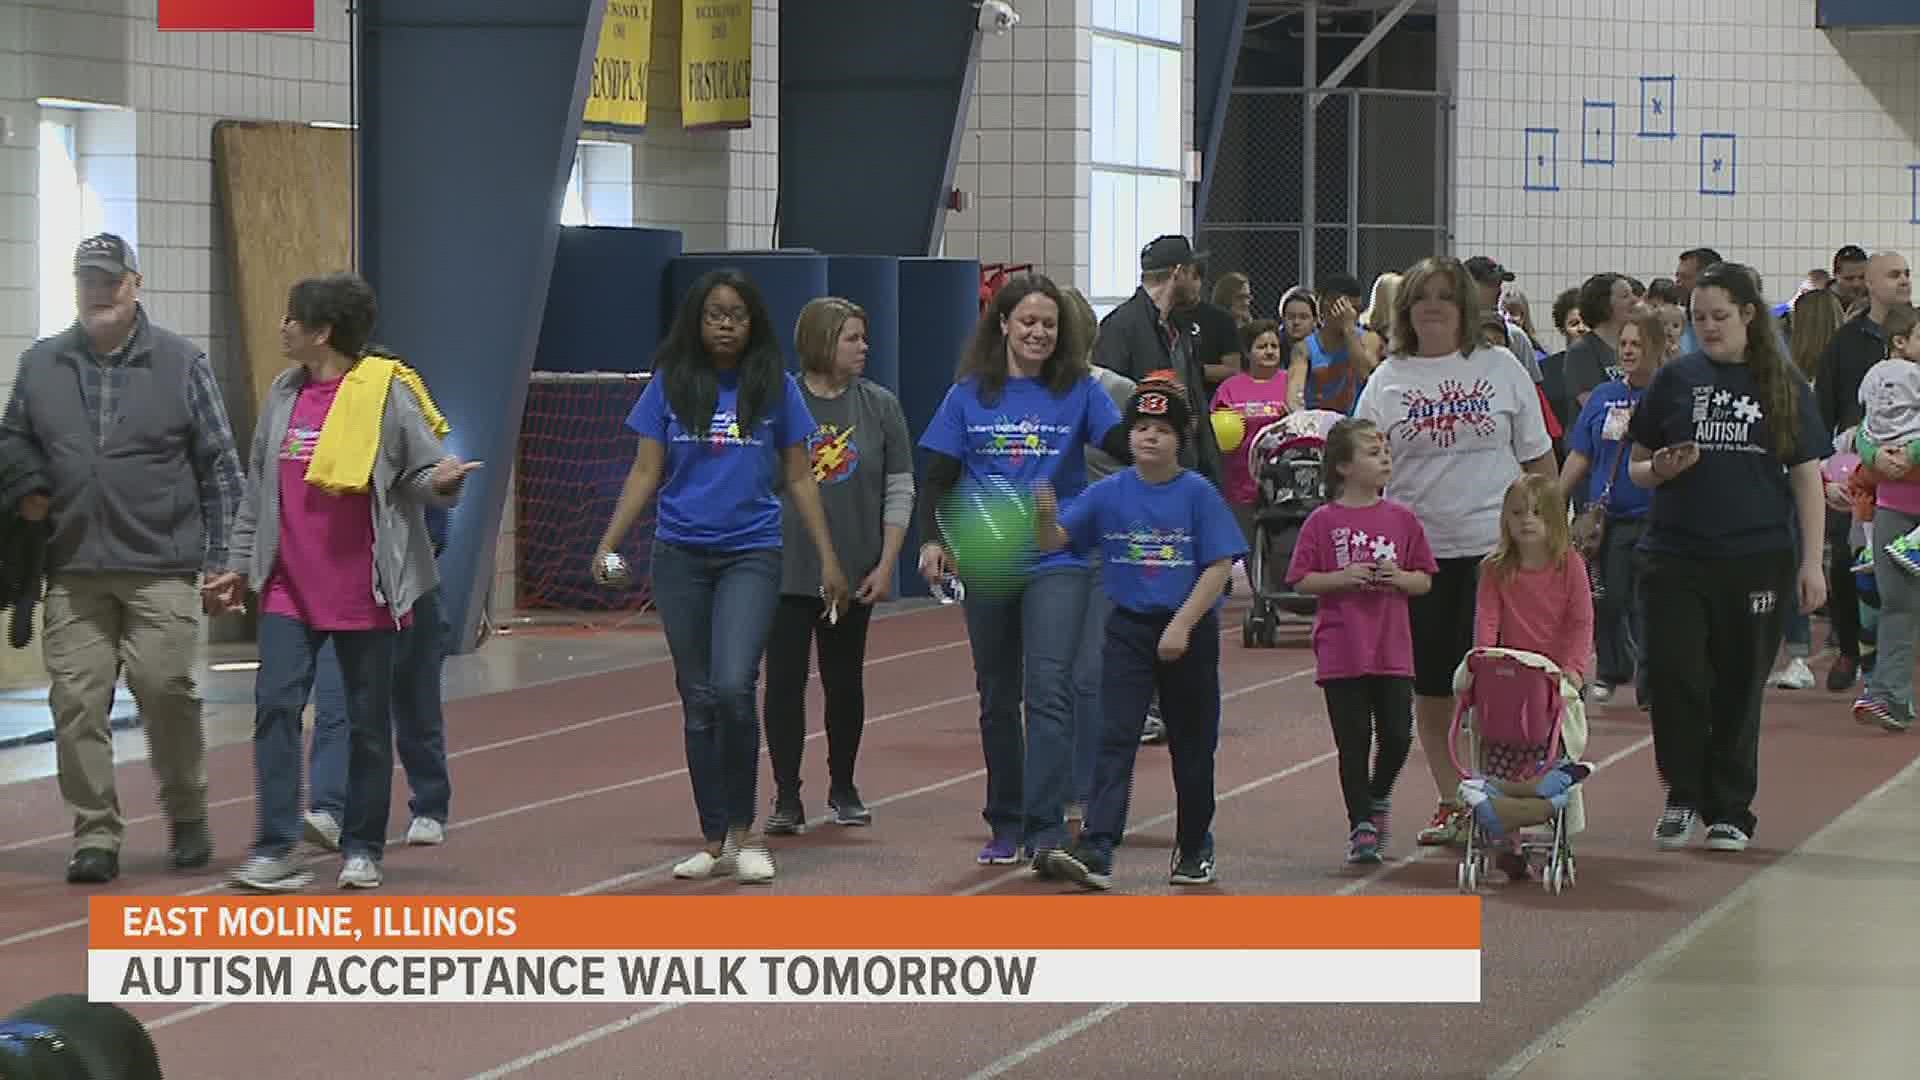 The walk Saturday in East Moline is a way to rally behind those impacted by autism, promote acceptance and educate others about it.